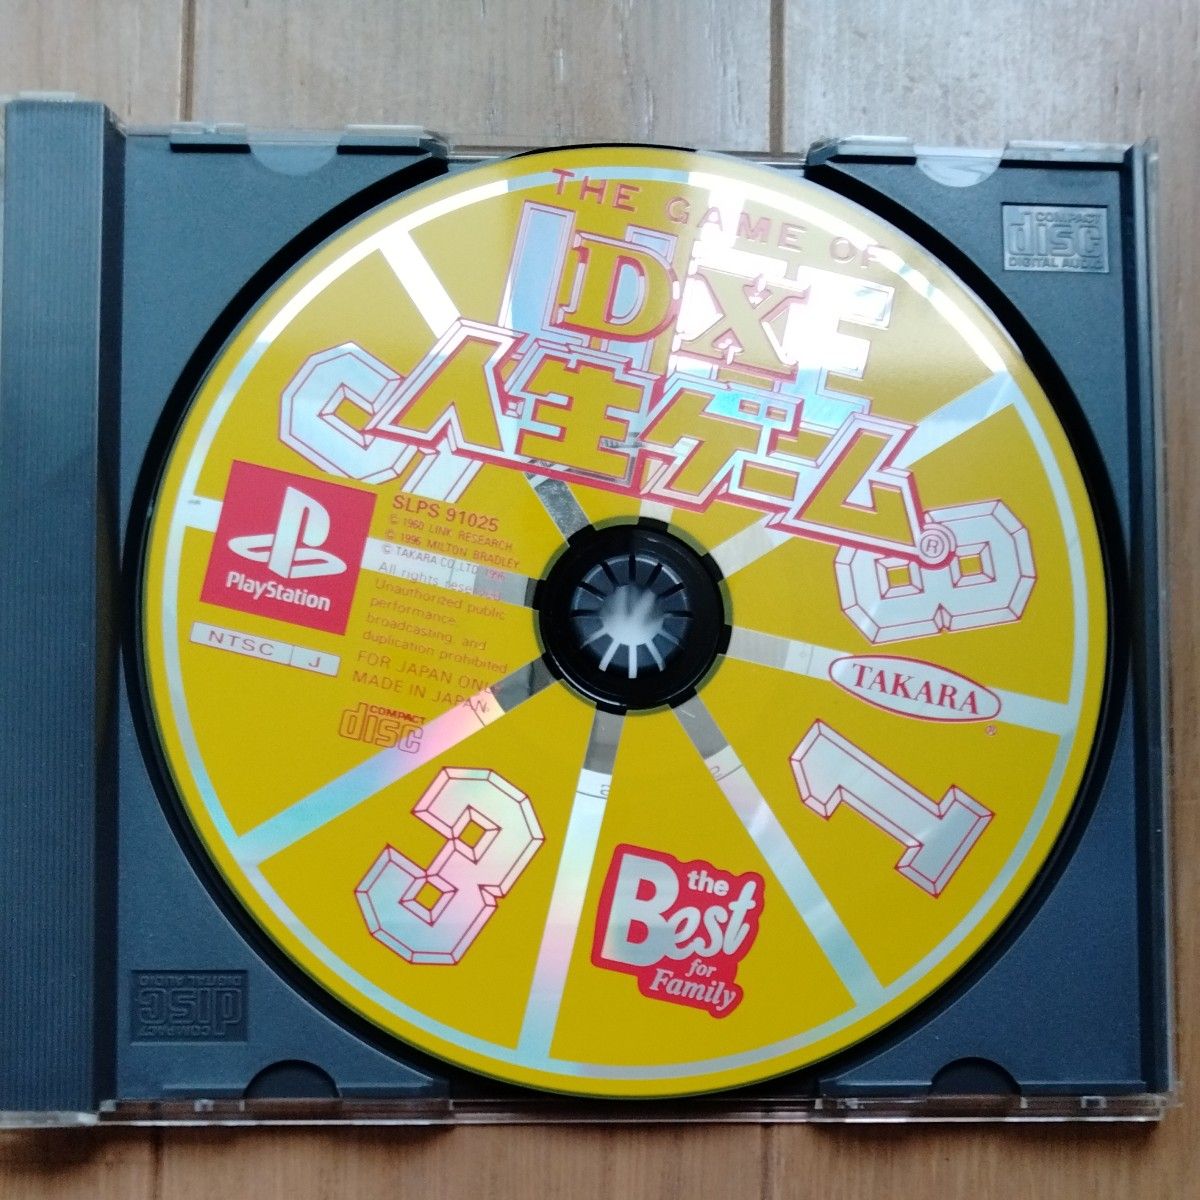 ps1 鉄拳３ ps1 DX人生ゲーム 